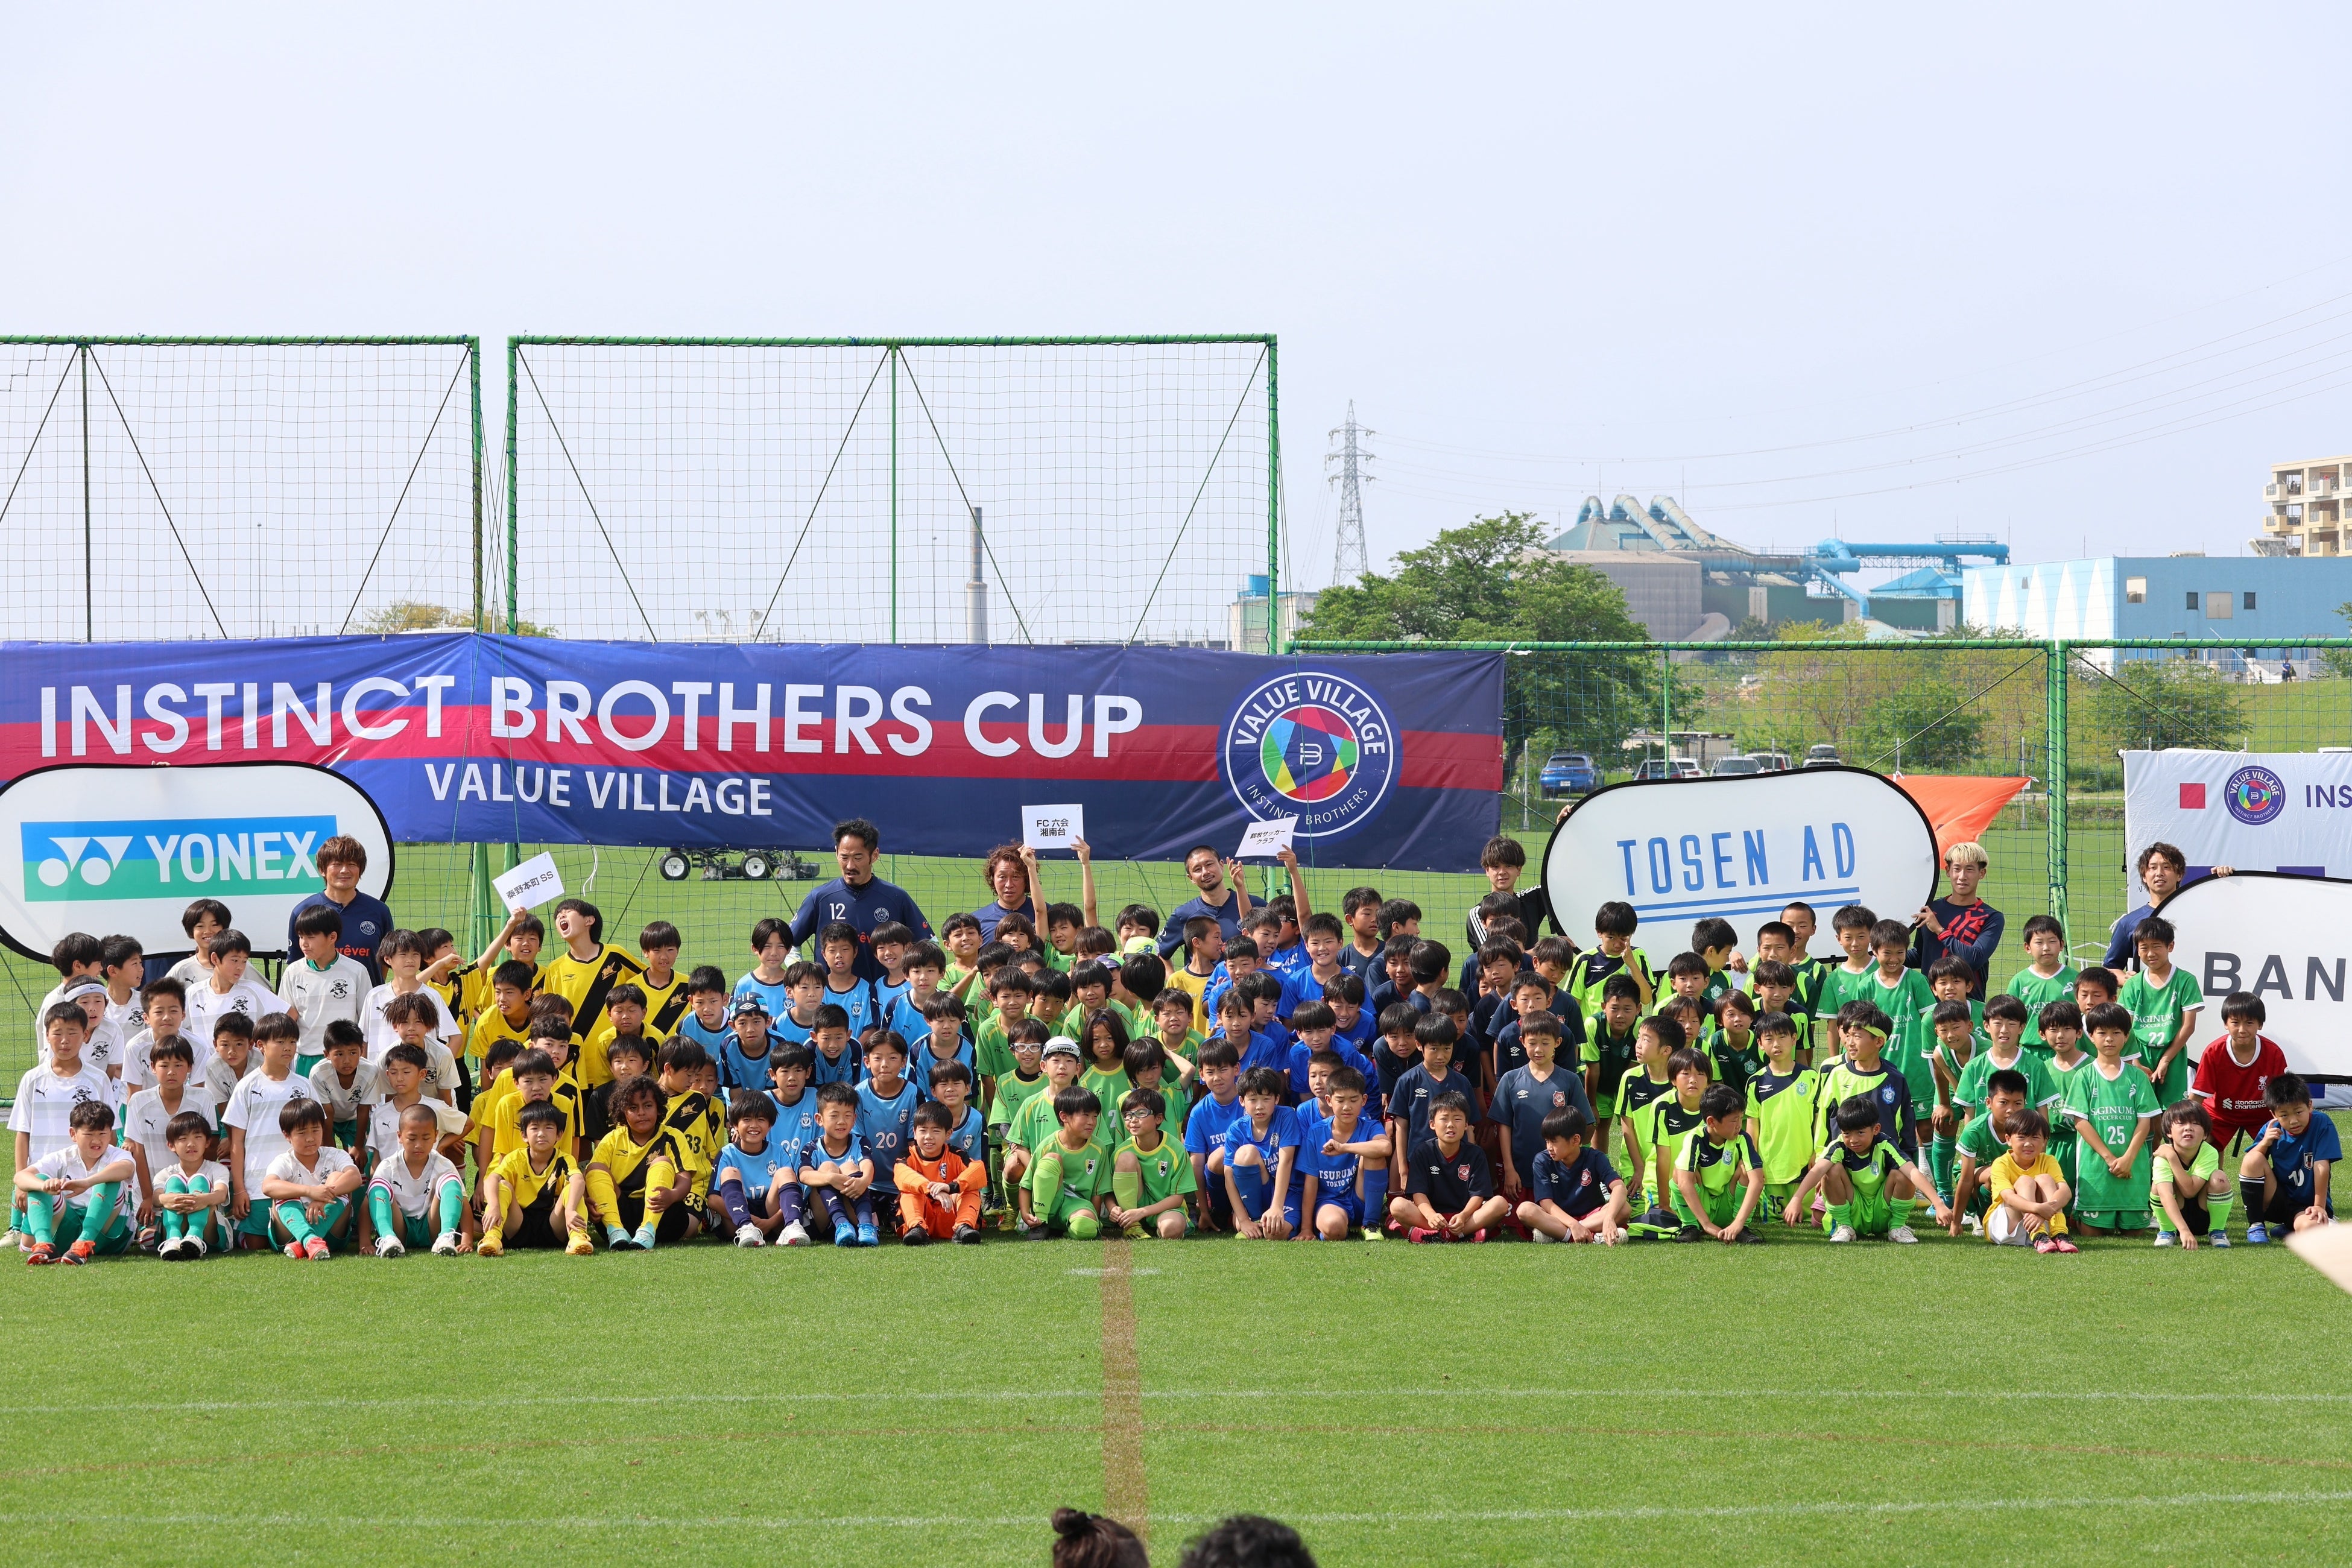 INSTINCT BROTHERS CUP inˑ